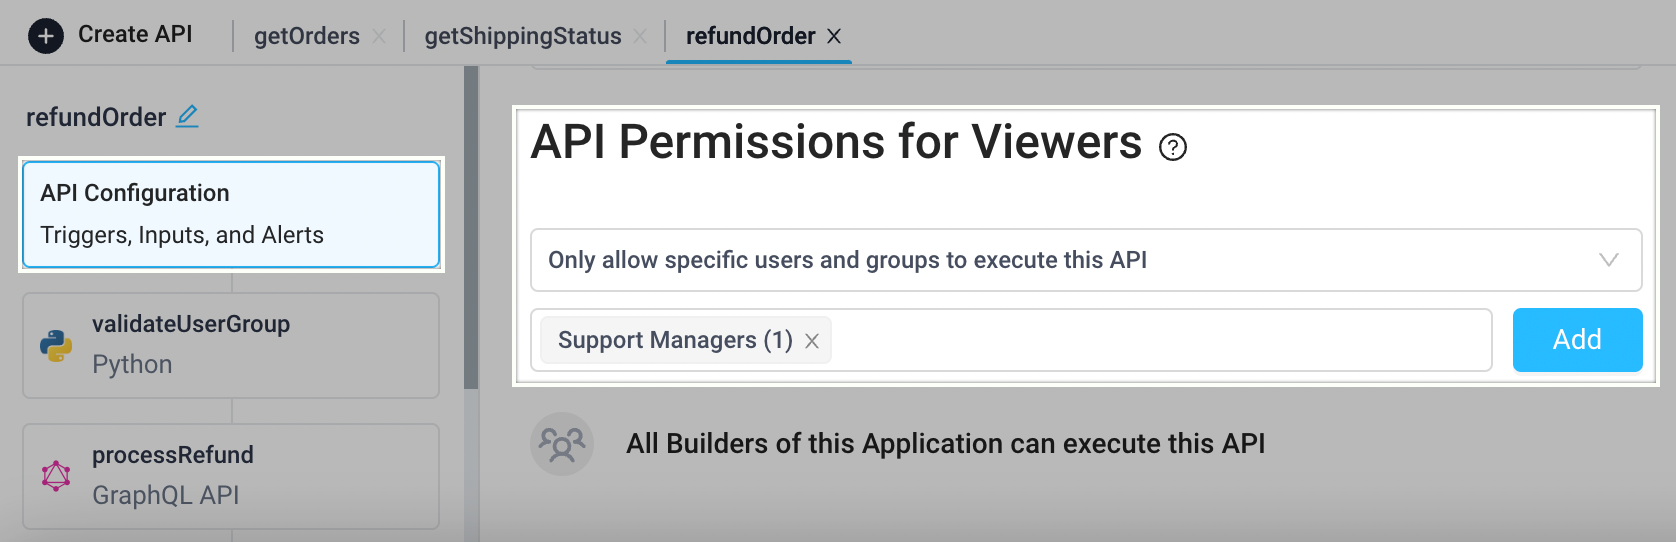 Permissions can also be set on the API directly per user or per group on the bottom of the API Configuration tab.